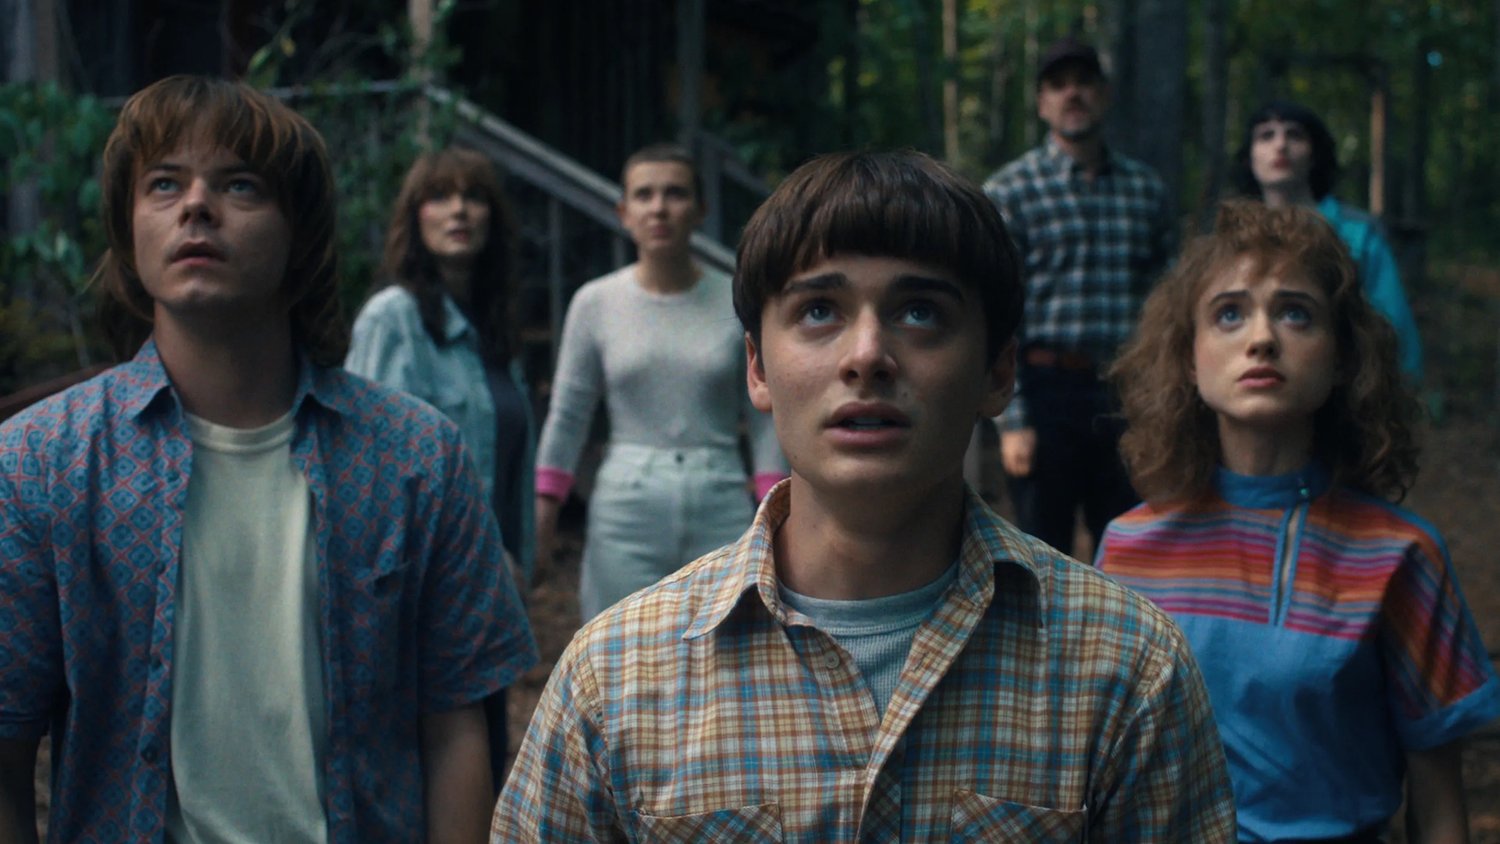 STRANGER THINGS Writers Describe Season 5 as a Baby "Injected with Steroids"